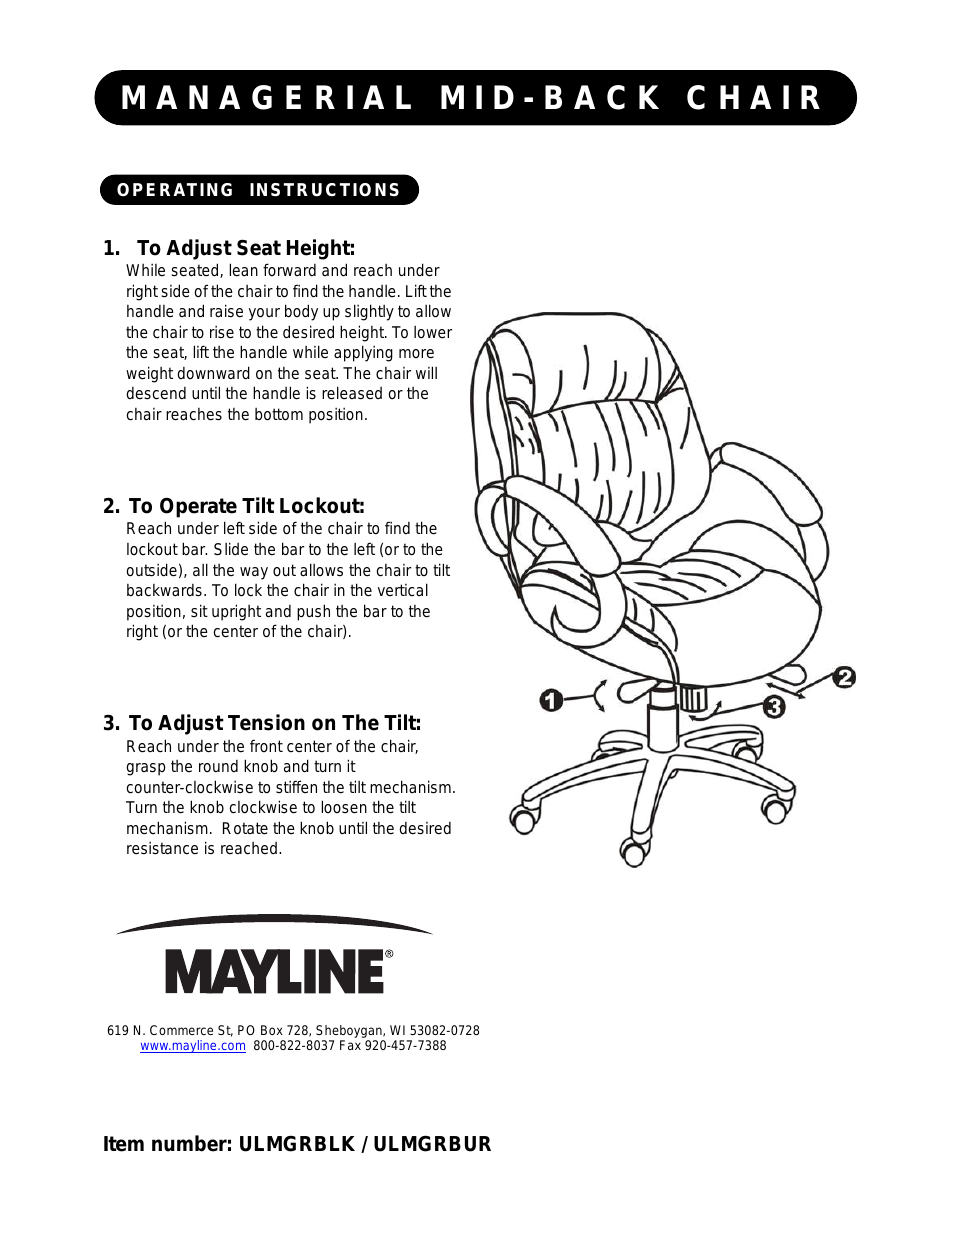 100 Series Mid-Back Chair